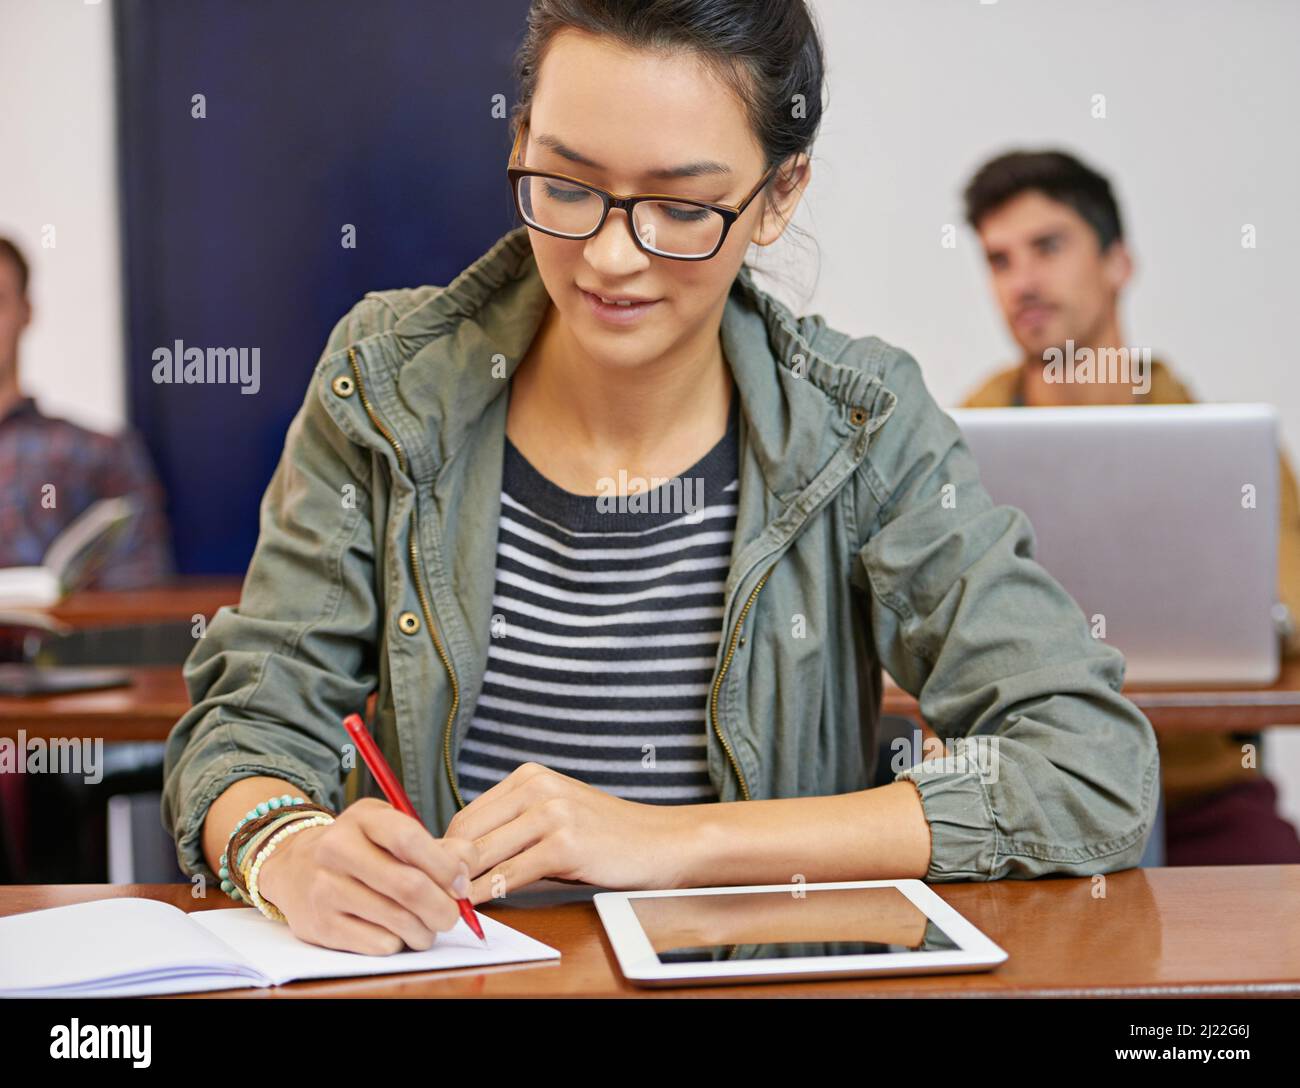 Doing the work to achieve her dreams. Cropped shot of a young woman using notes and digital tablet in class. Stock Photo